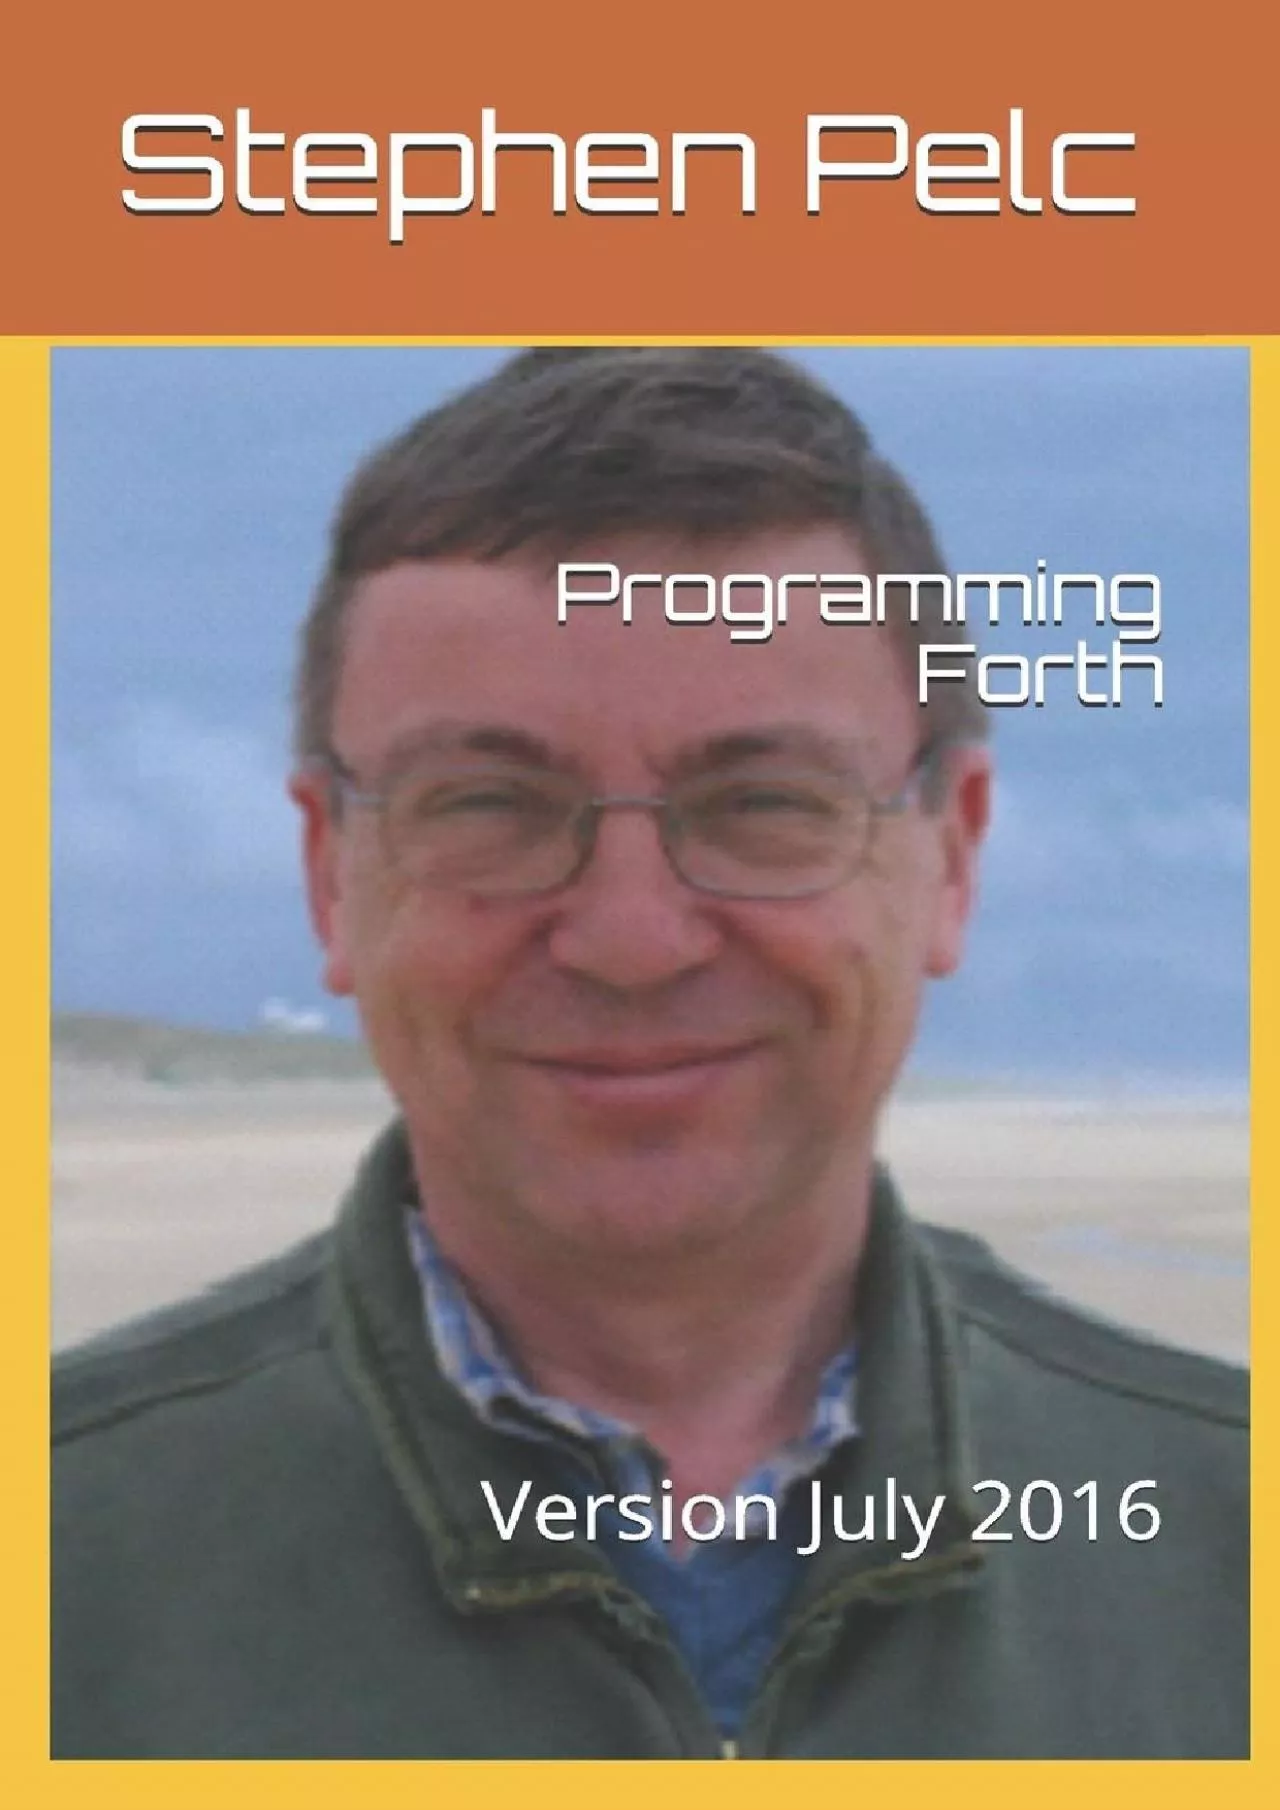 [READING BOOK]-Programming Forth: Version July 2016